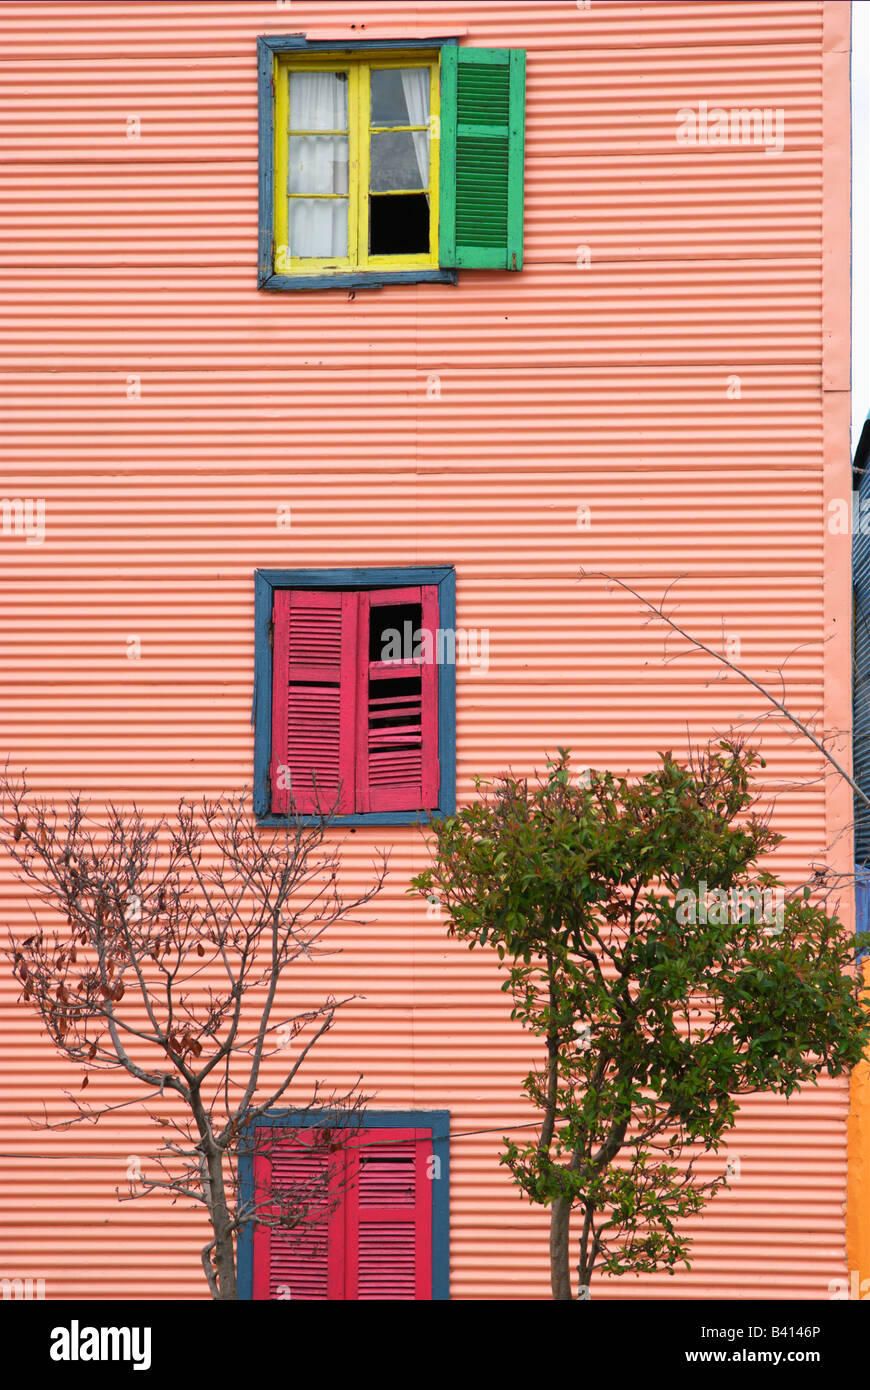 House made of corrugated iron with colorful shutters Stock Photo